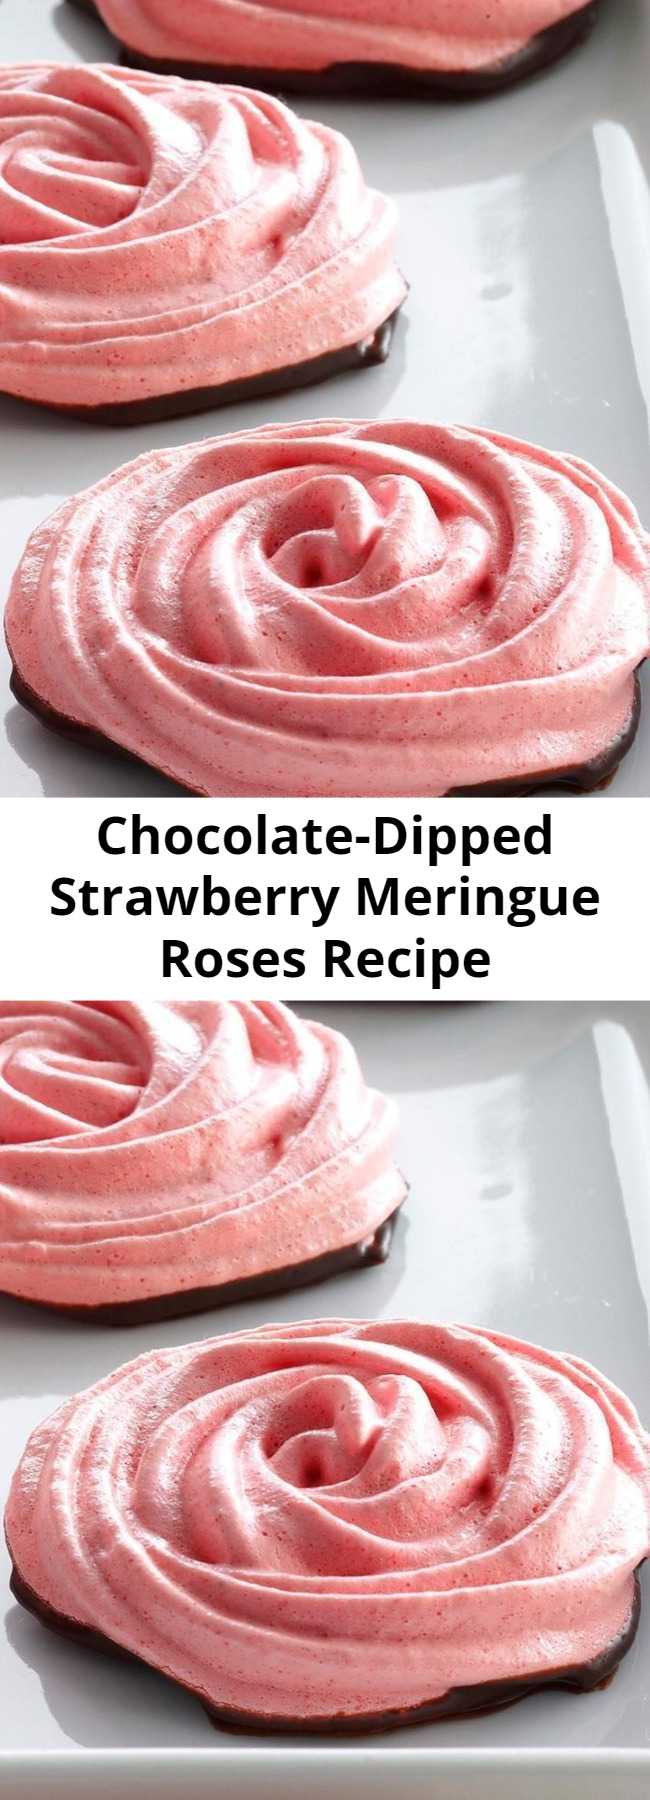 Chocolate-Dipped Strawberry Meringue Roses Recipe - Eat these pretty treats as is, or crush them into a bowl of strawberries and whipped cream. Readers of my blog, utry.it, went nuts when I posted that idea.